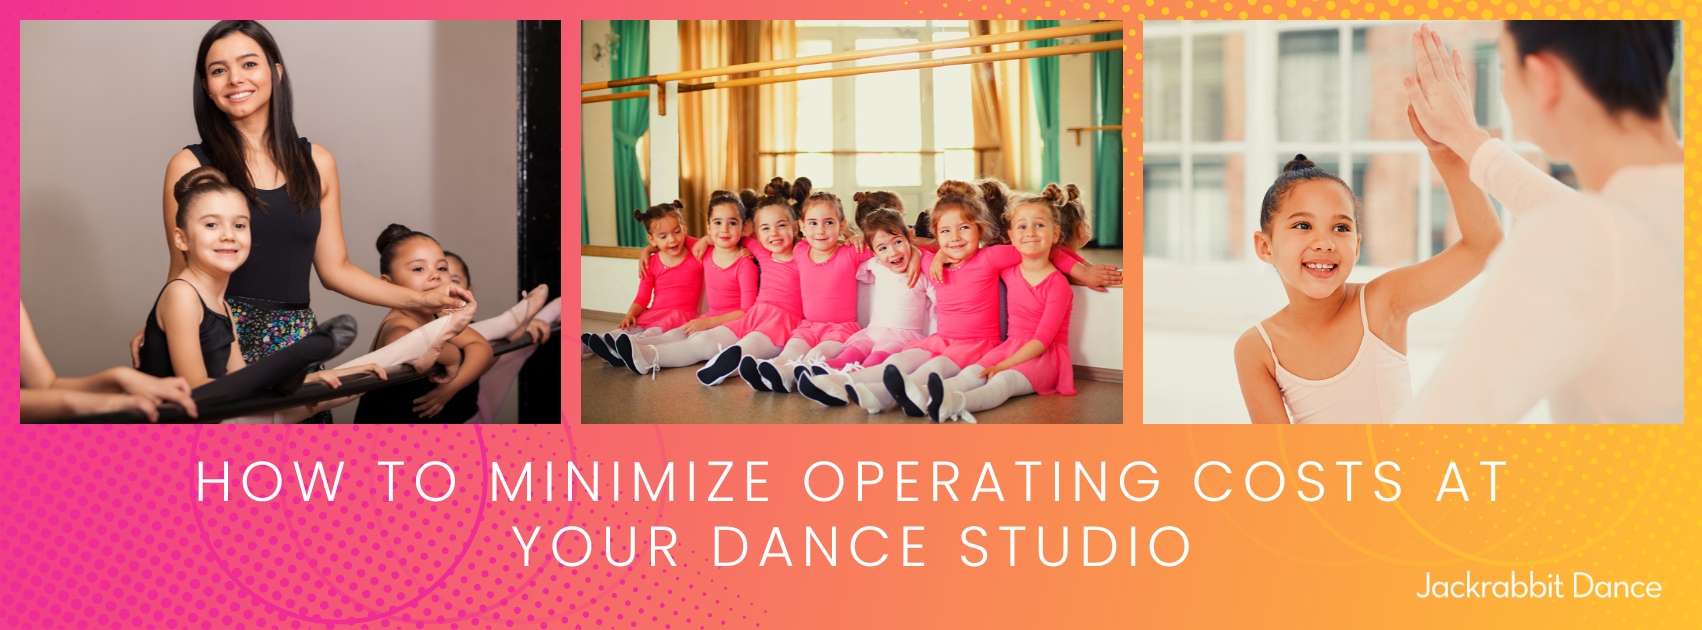 How to Minimize Operating Costs at Your Dance Studio